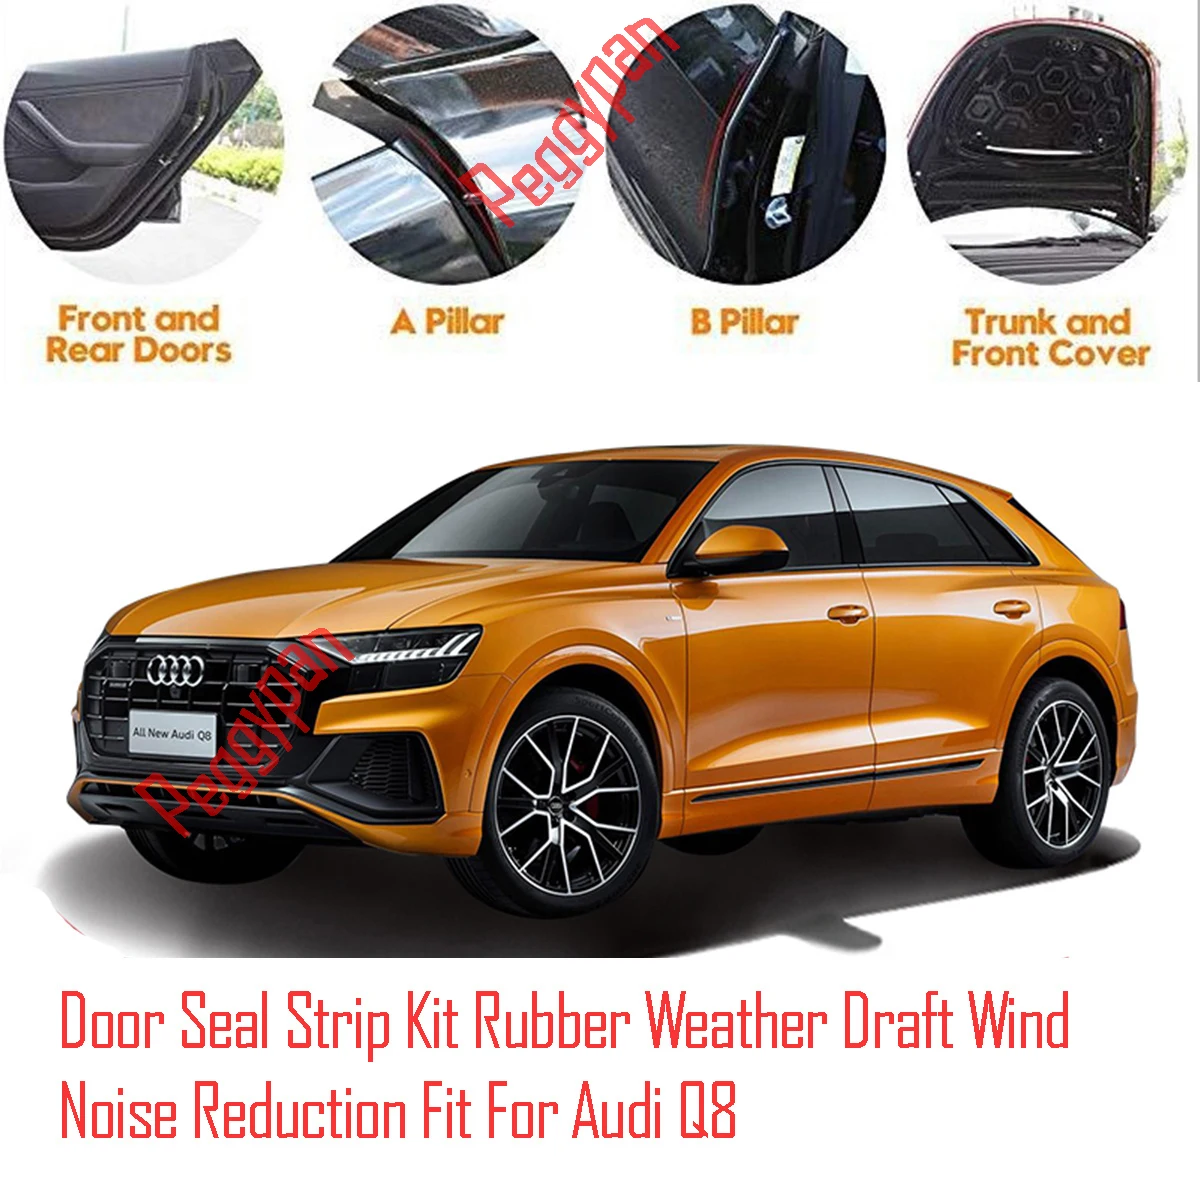 Door Seal Strip Kit Self Adhesive Window Engine Cover Soundproof Rubber Weather Draft Wind Noise Reduction Fit For Audi Q8